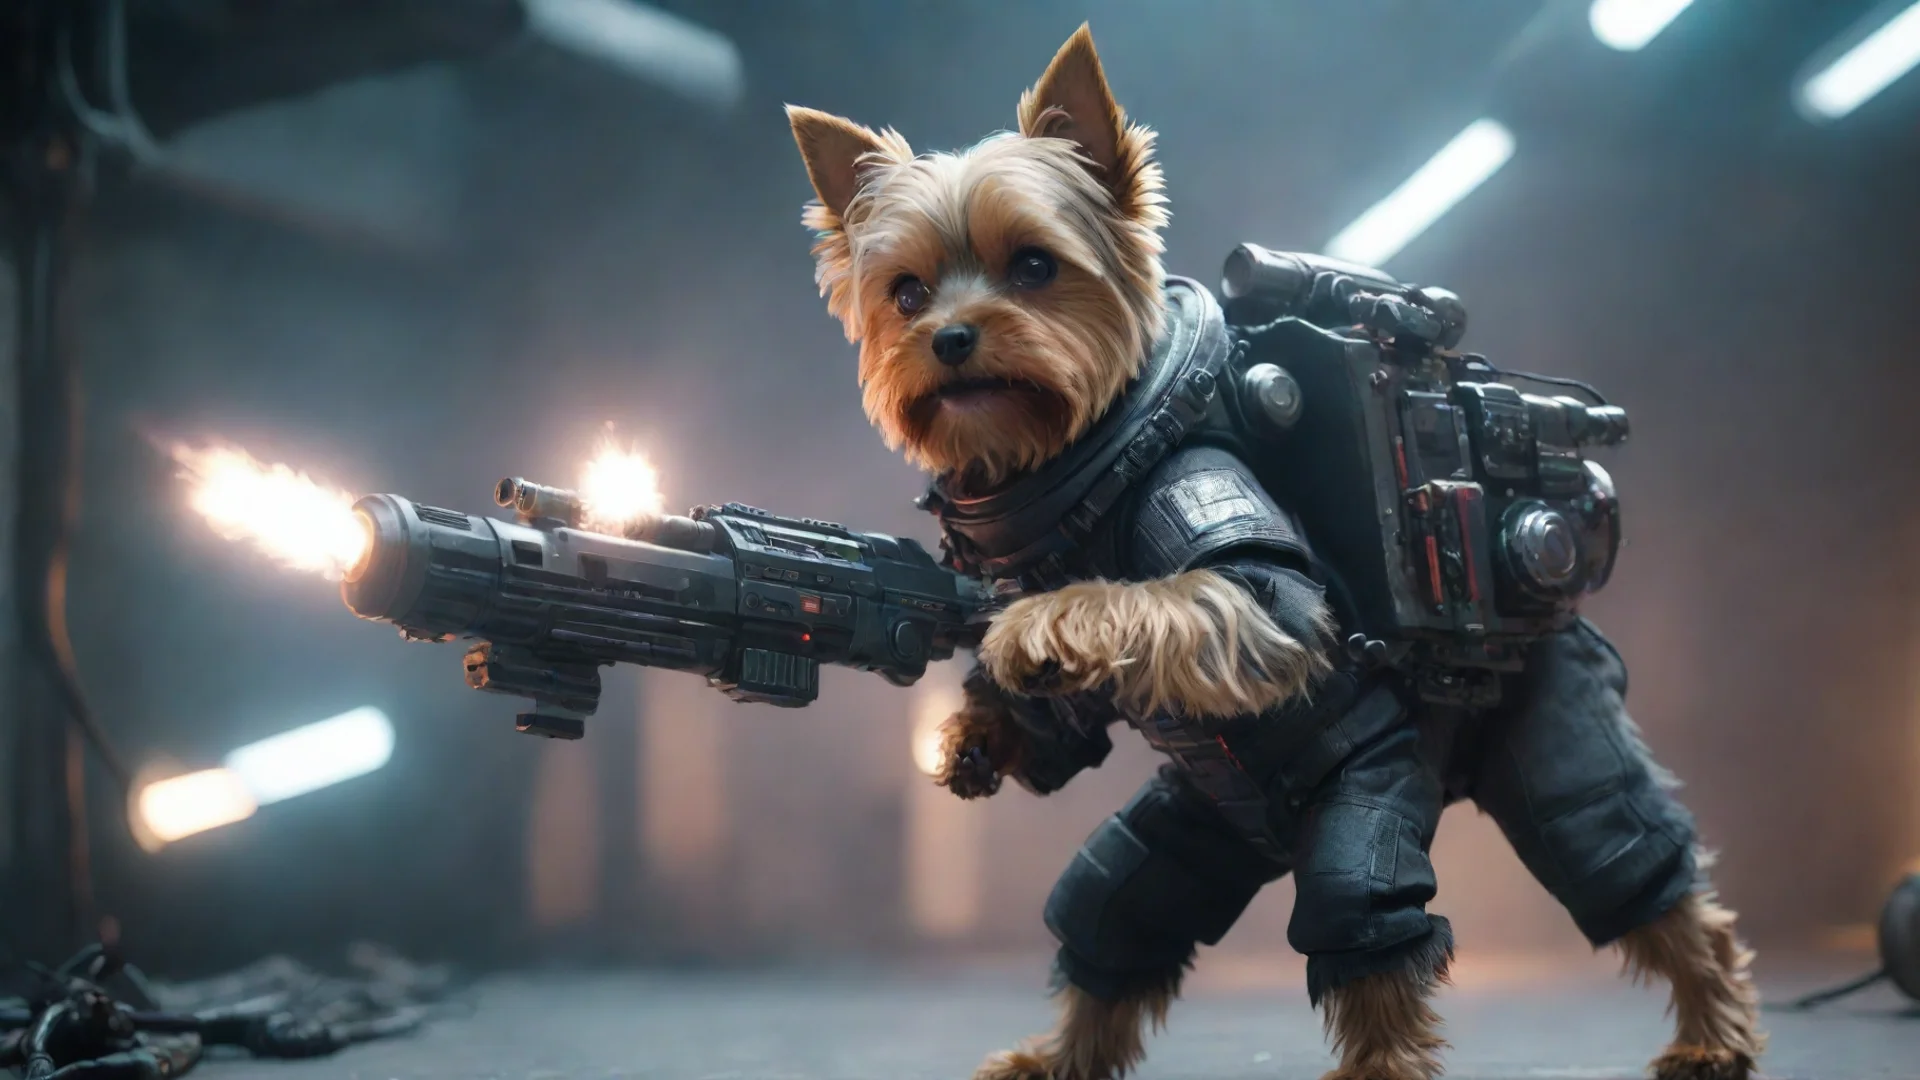 aiartstation art aione yorkshire terrier in a cyberpunk space suit firing big weapon lot lighting confident engaging wow 3 wide